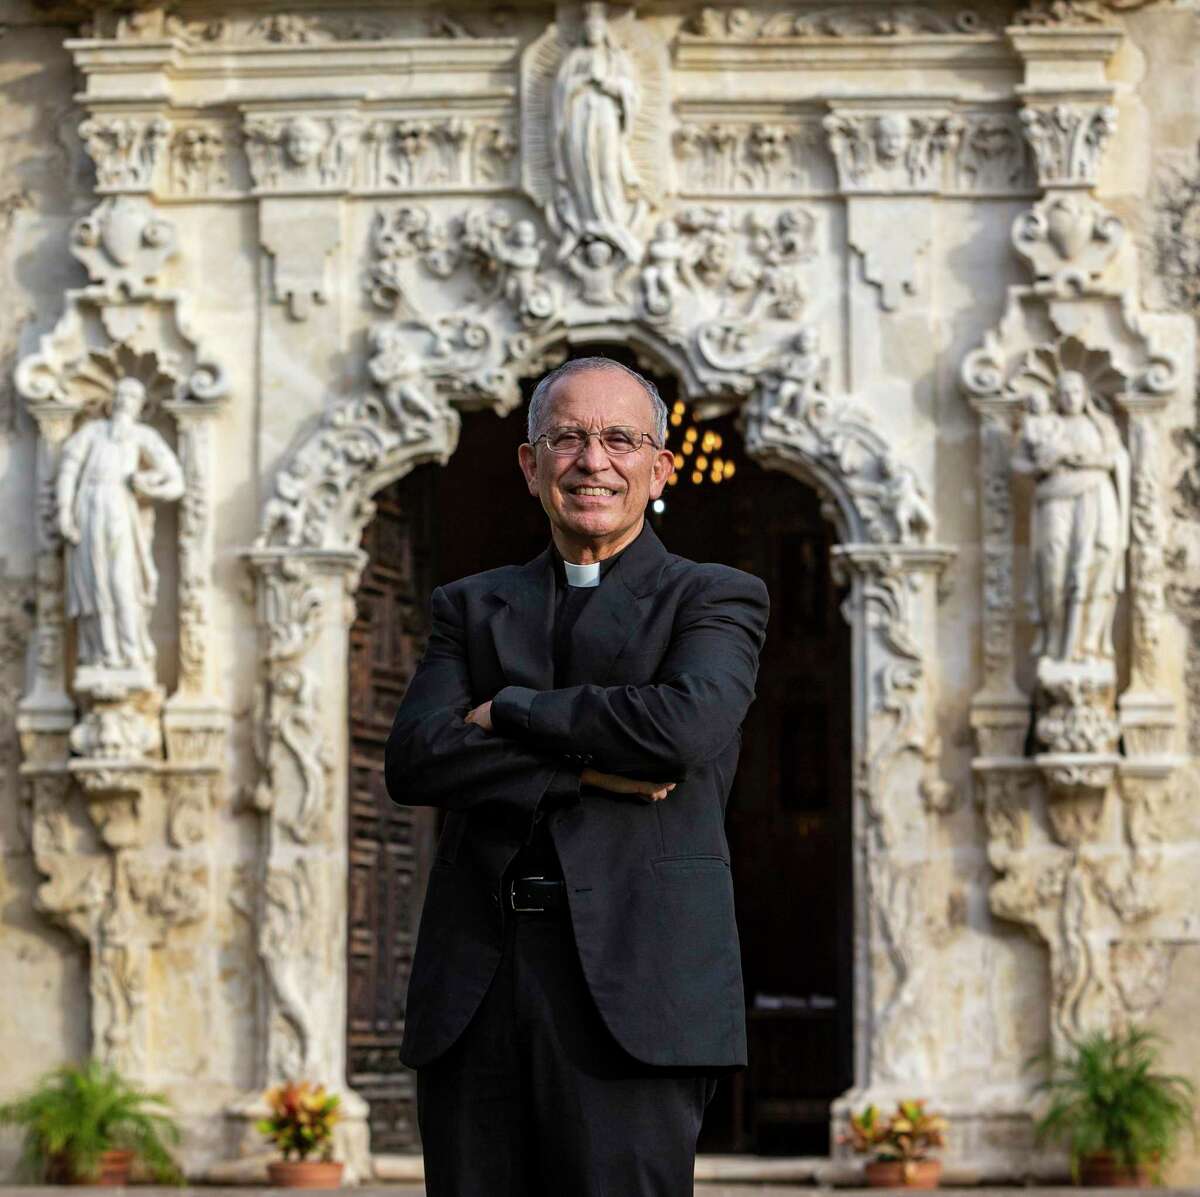 Father David Garcia, who is releasing his first book, "Pandemic Preaching," poses Tuesday, Oct. 26, 2021 at Mission San Jose. The book is a collection of homilies Garcia wrote during the first year of the pandemic.